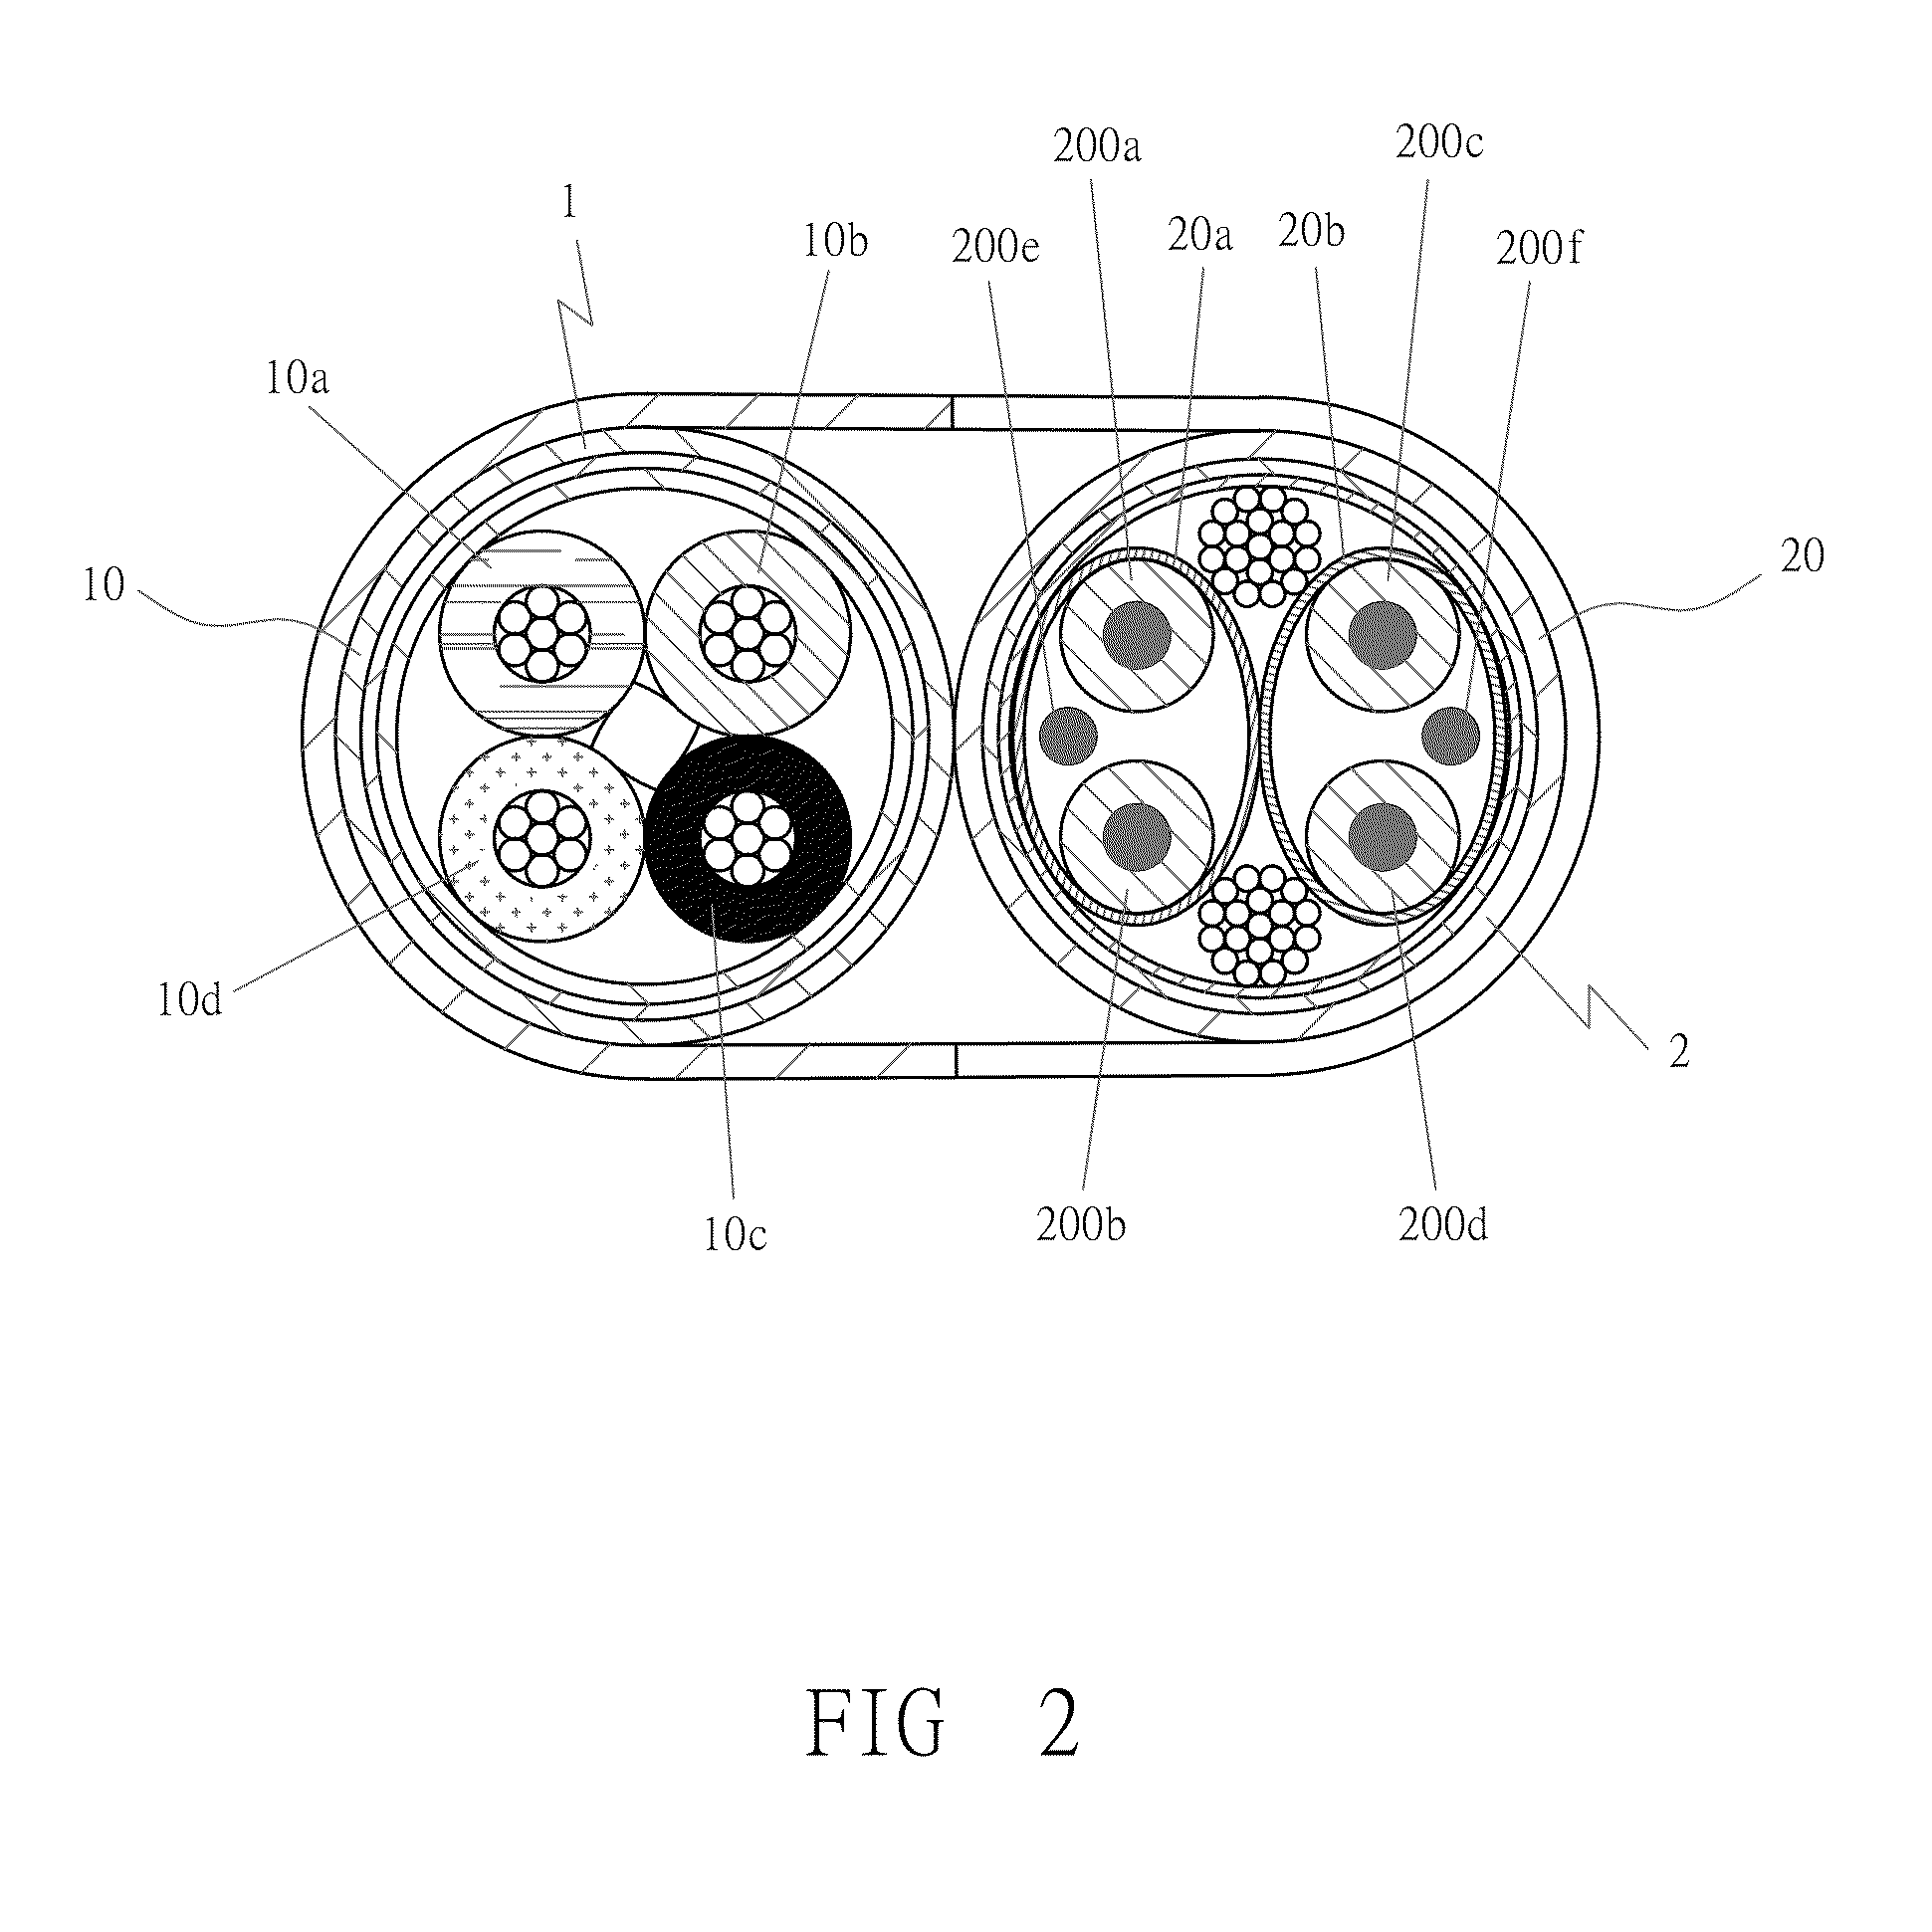 High-speed signal transmission device